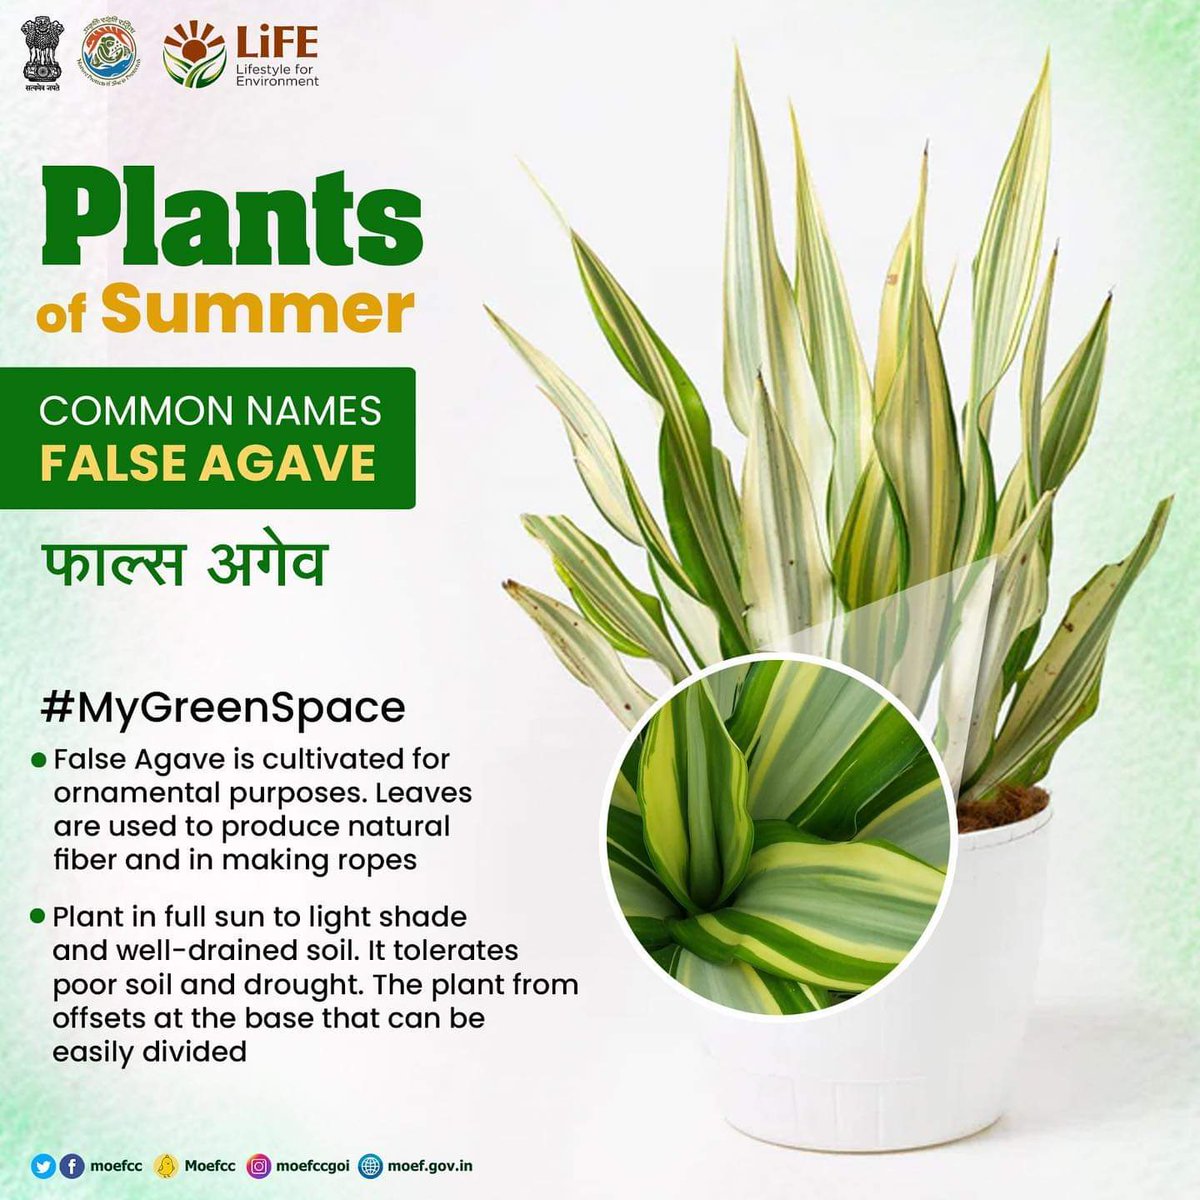 Make your summer refreshing by planting #PlantsofSummer in your indoor and outdoor spaces! #MyGreenSpace #ProPlanetPeople #MissionLiFE